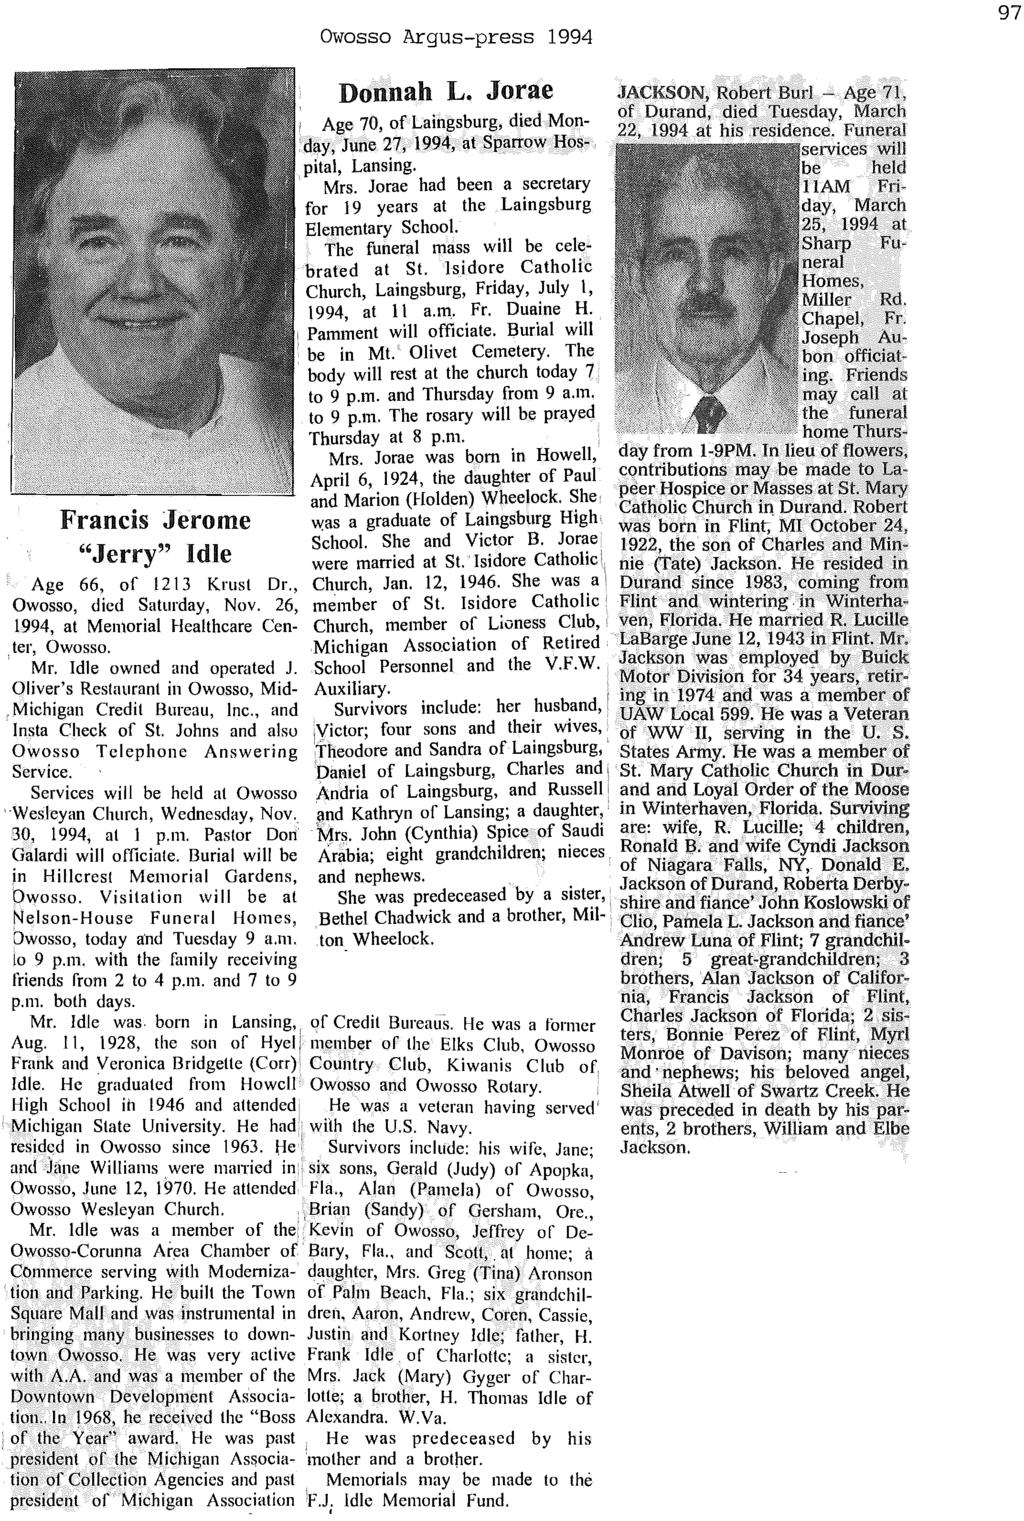 Owosso Argus-press 1994 97 Donnah L. Jorae JACKSON, Robert Burl - Age 71, d' d M of Durand, died Tuesday, March : Age 70, of Laingsburg, Ie on- 22, 1994 at his.residence.